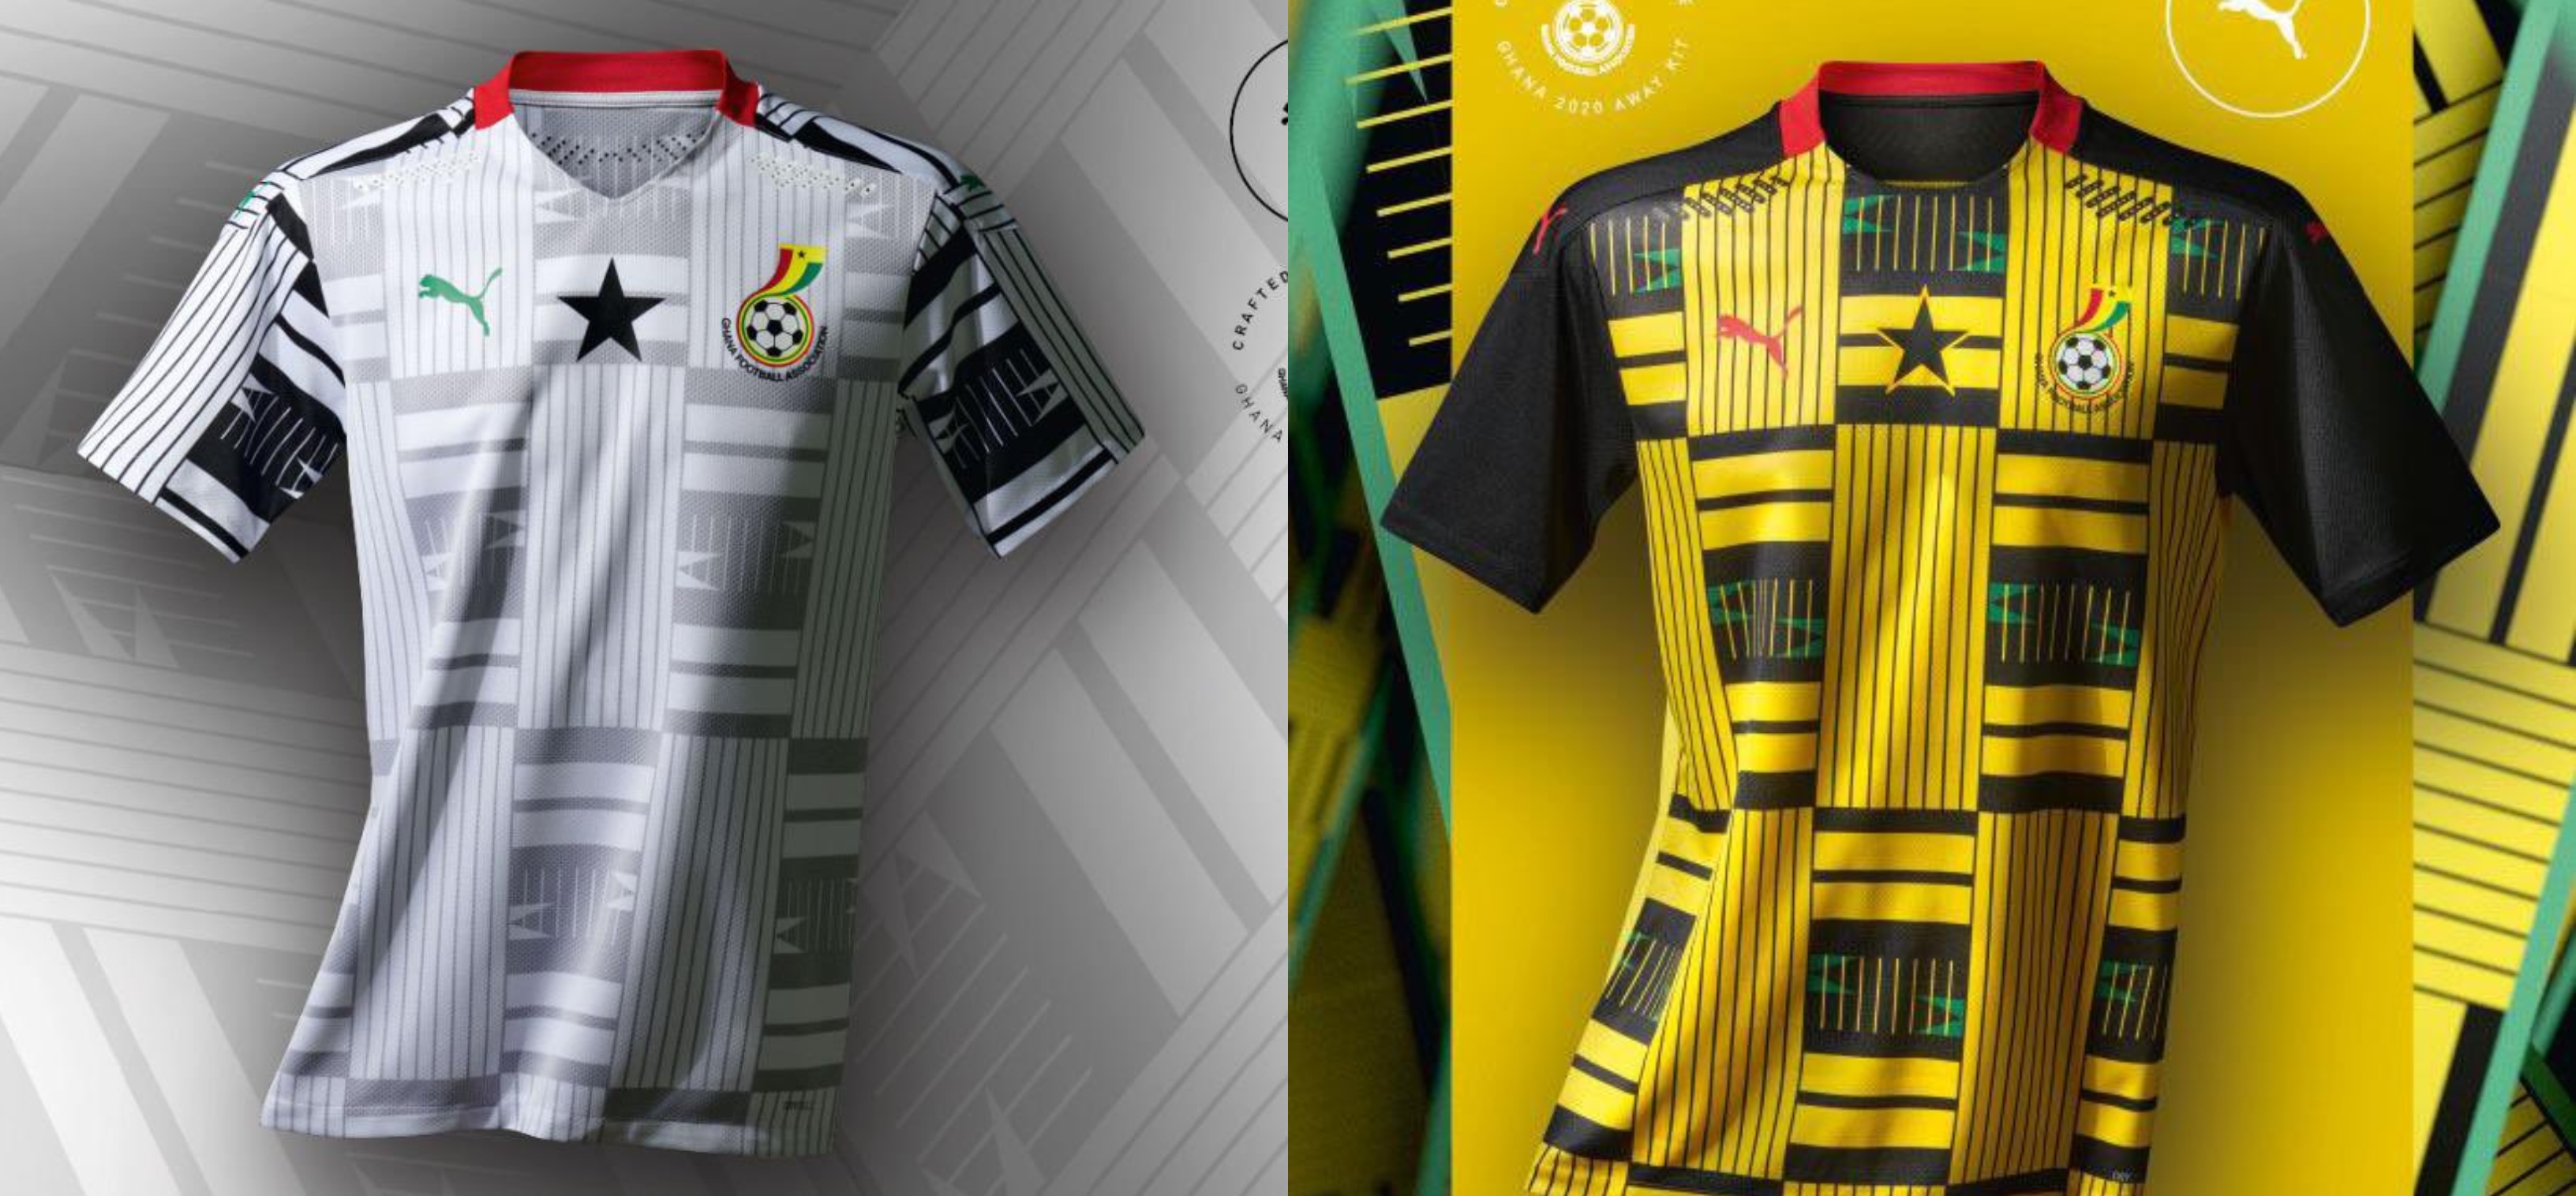 The new kits for 5 African countries designed by Puma cost $90 each |  Business Insider Africa